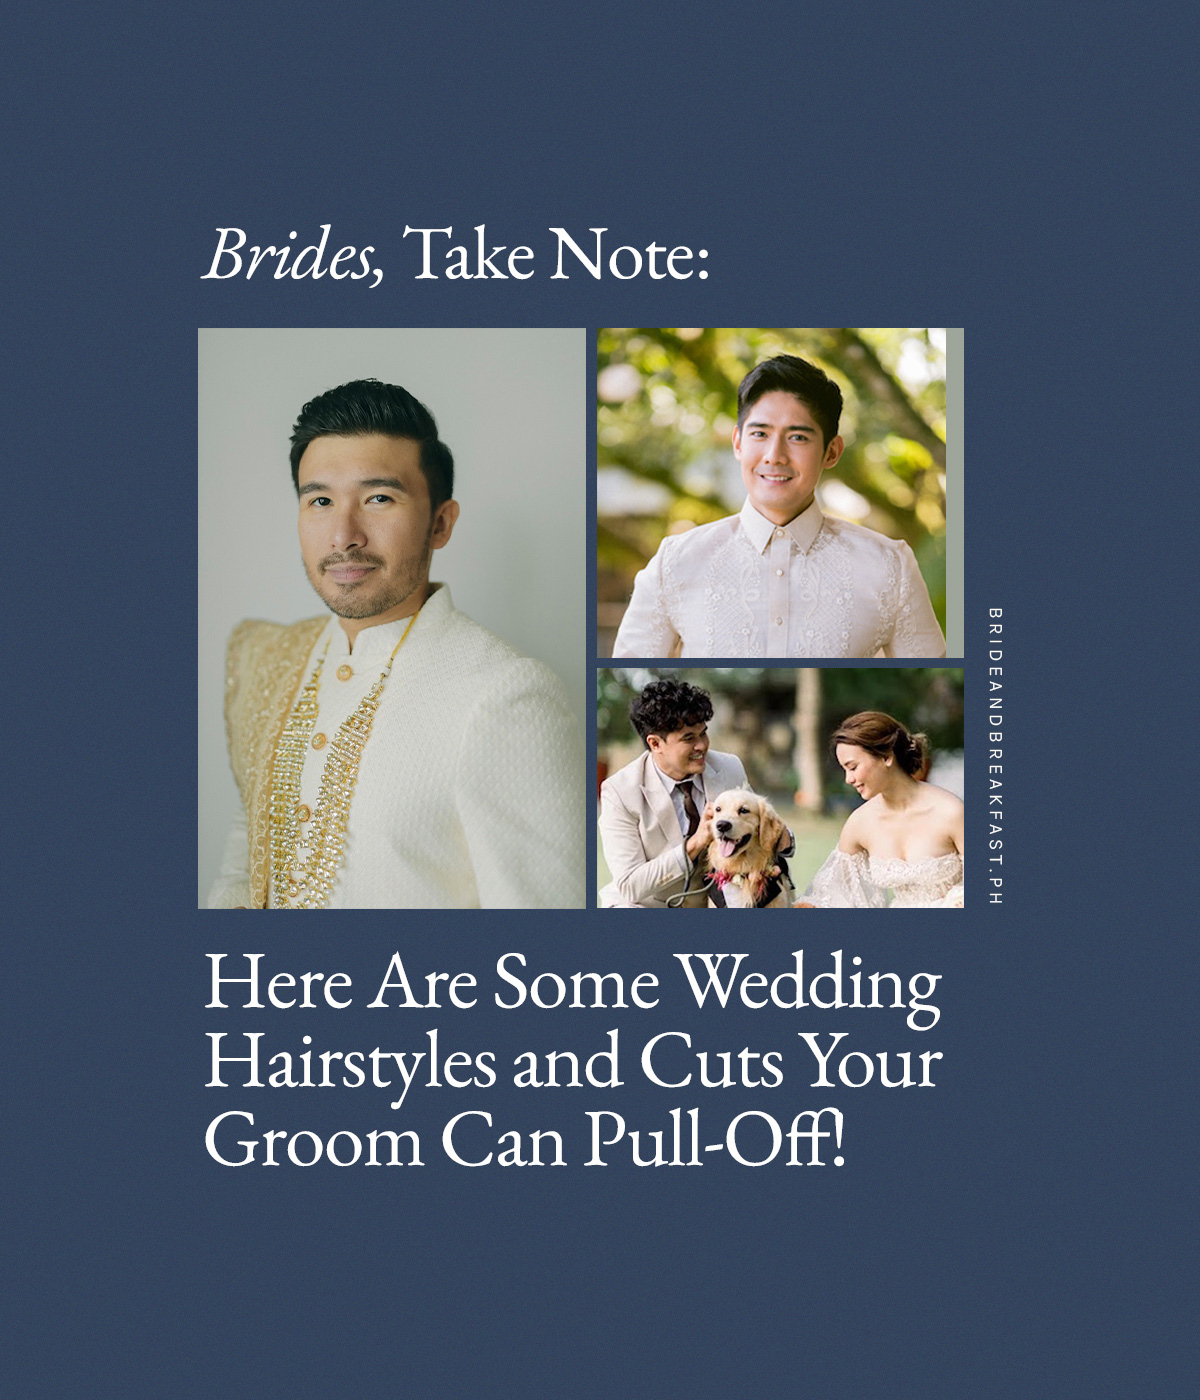 Brides, Take Note: Here Are Some Wedding Hairstyles and Cuts Your Groom Can Pull-Off!